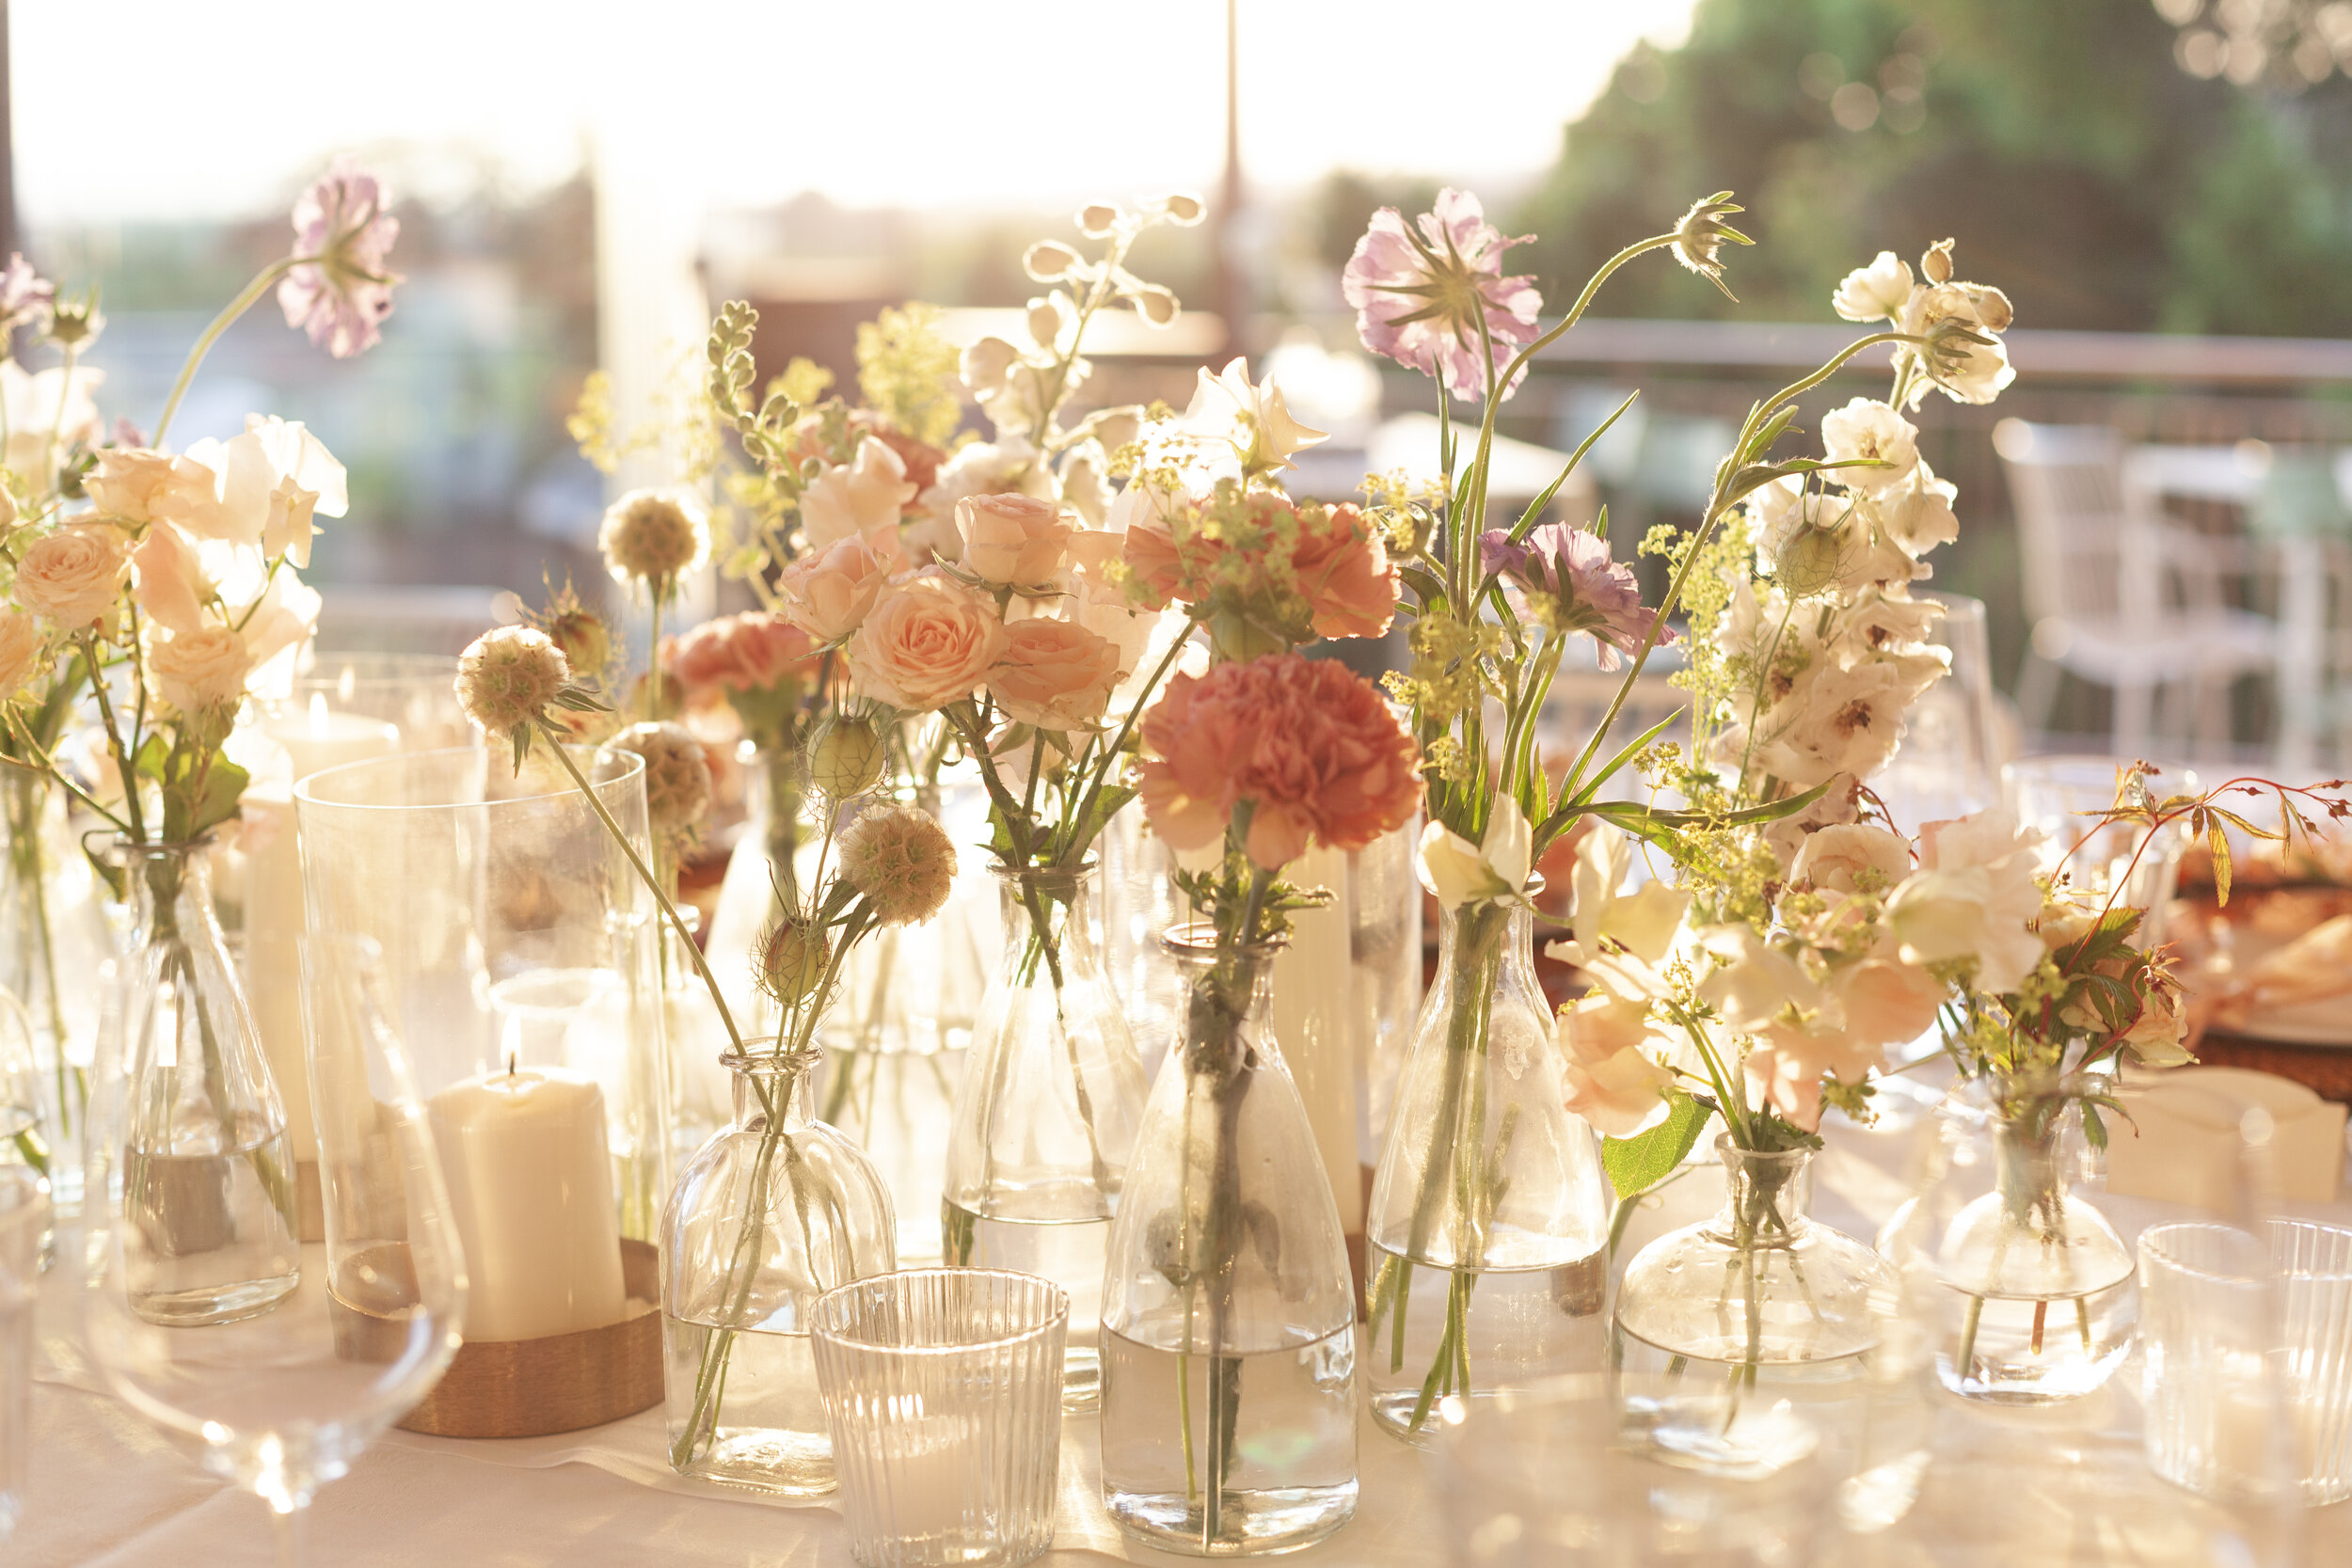 Flowers in sunlight during an event